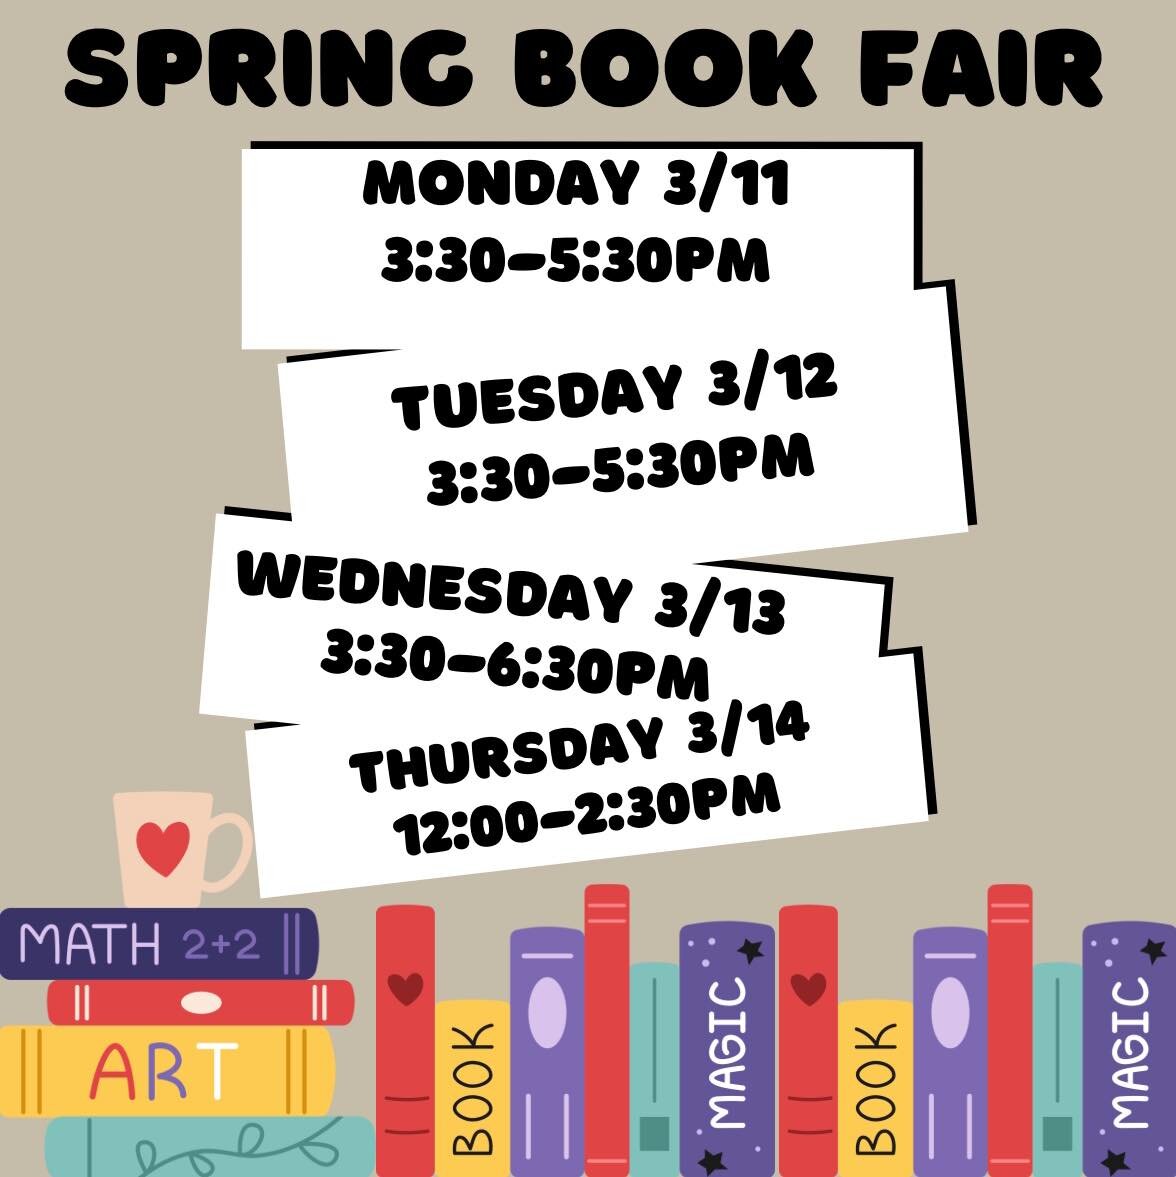 Mark your calendars 🗓️
The Spring Book Fair is just around the corner 📚
It will take place in the Library located in Building C!

#thatsPCS #premiercharterschool #bookfair